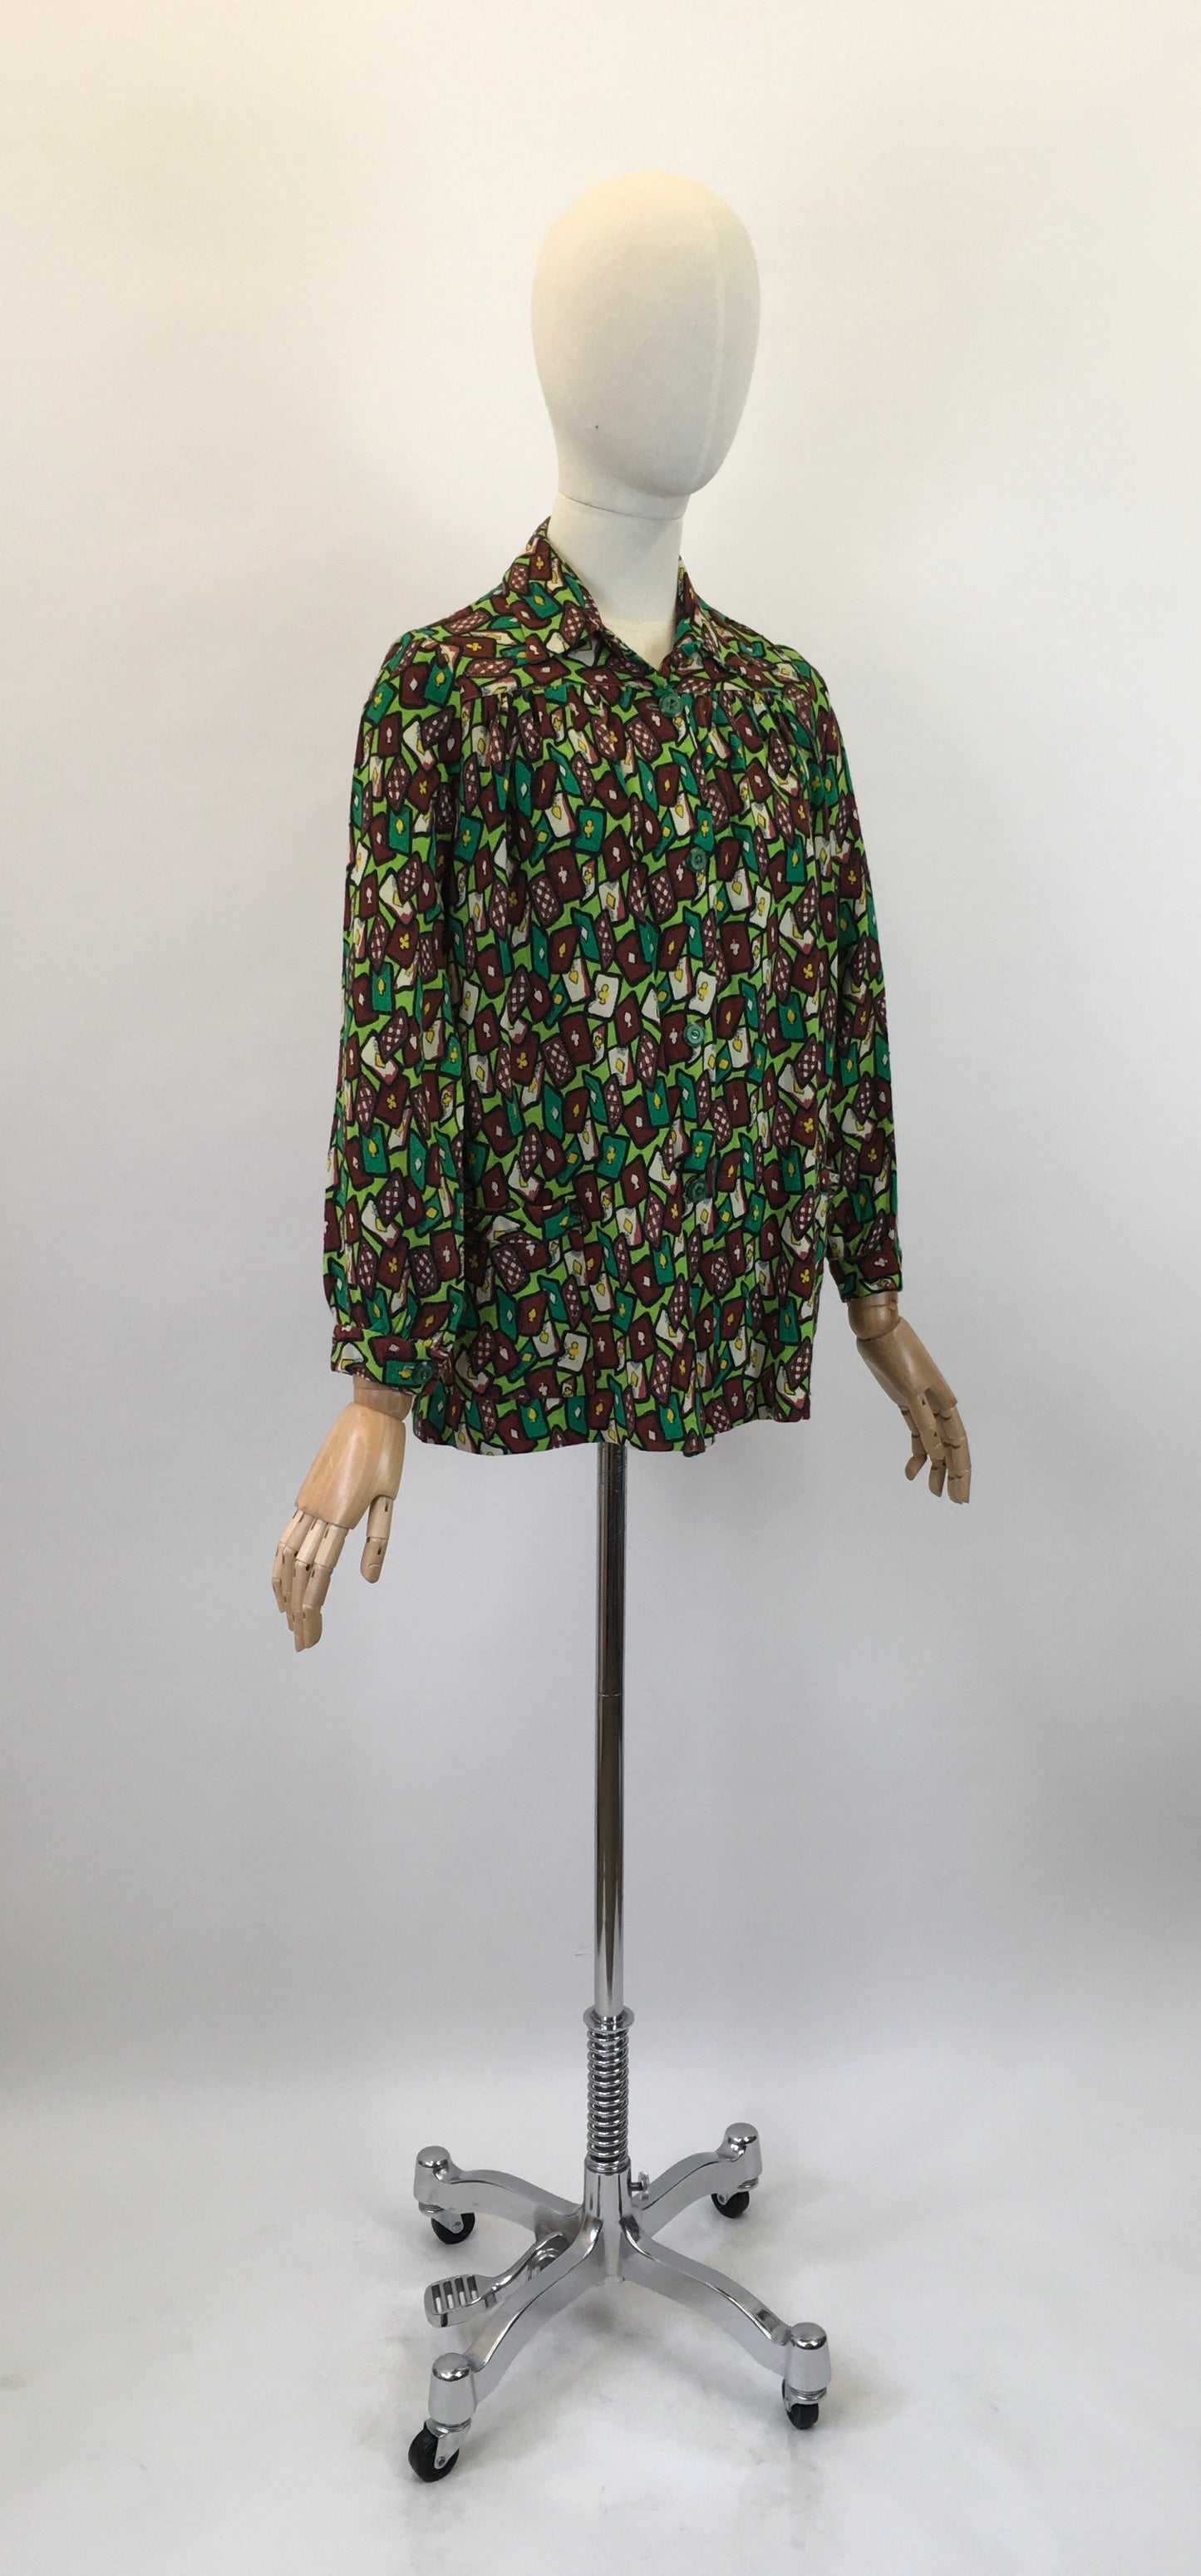 Original 1940's Fabulous Novelty Print ' Playing Cards' Smock - In Chartreuse, Emerald Green, Yellow & Brown